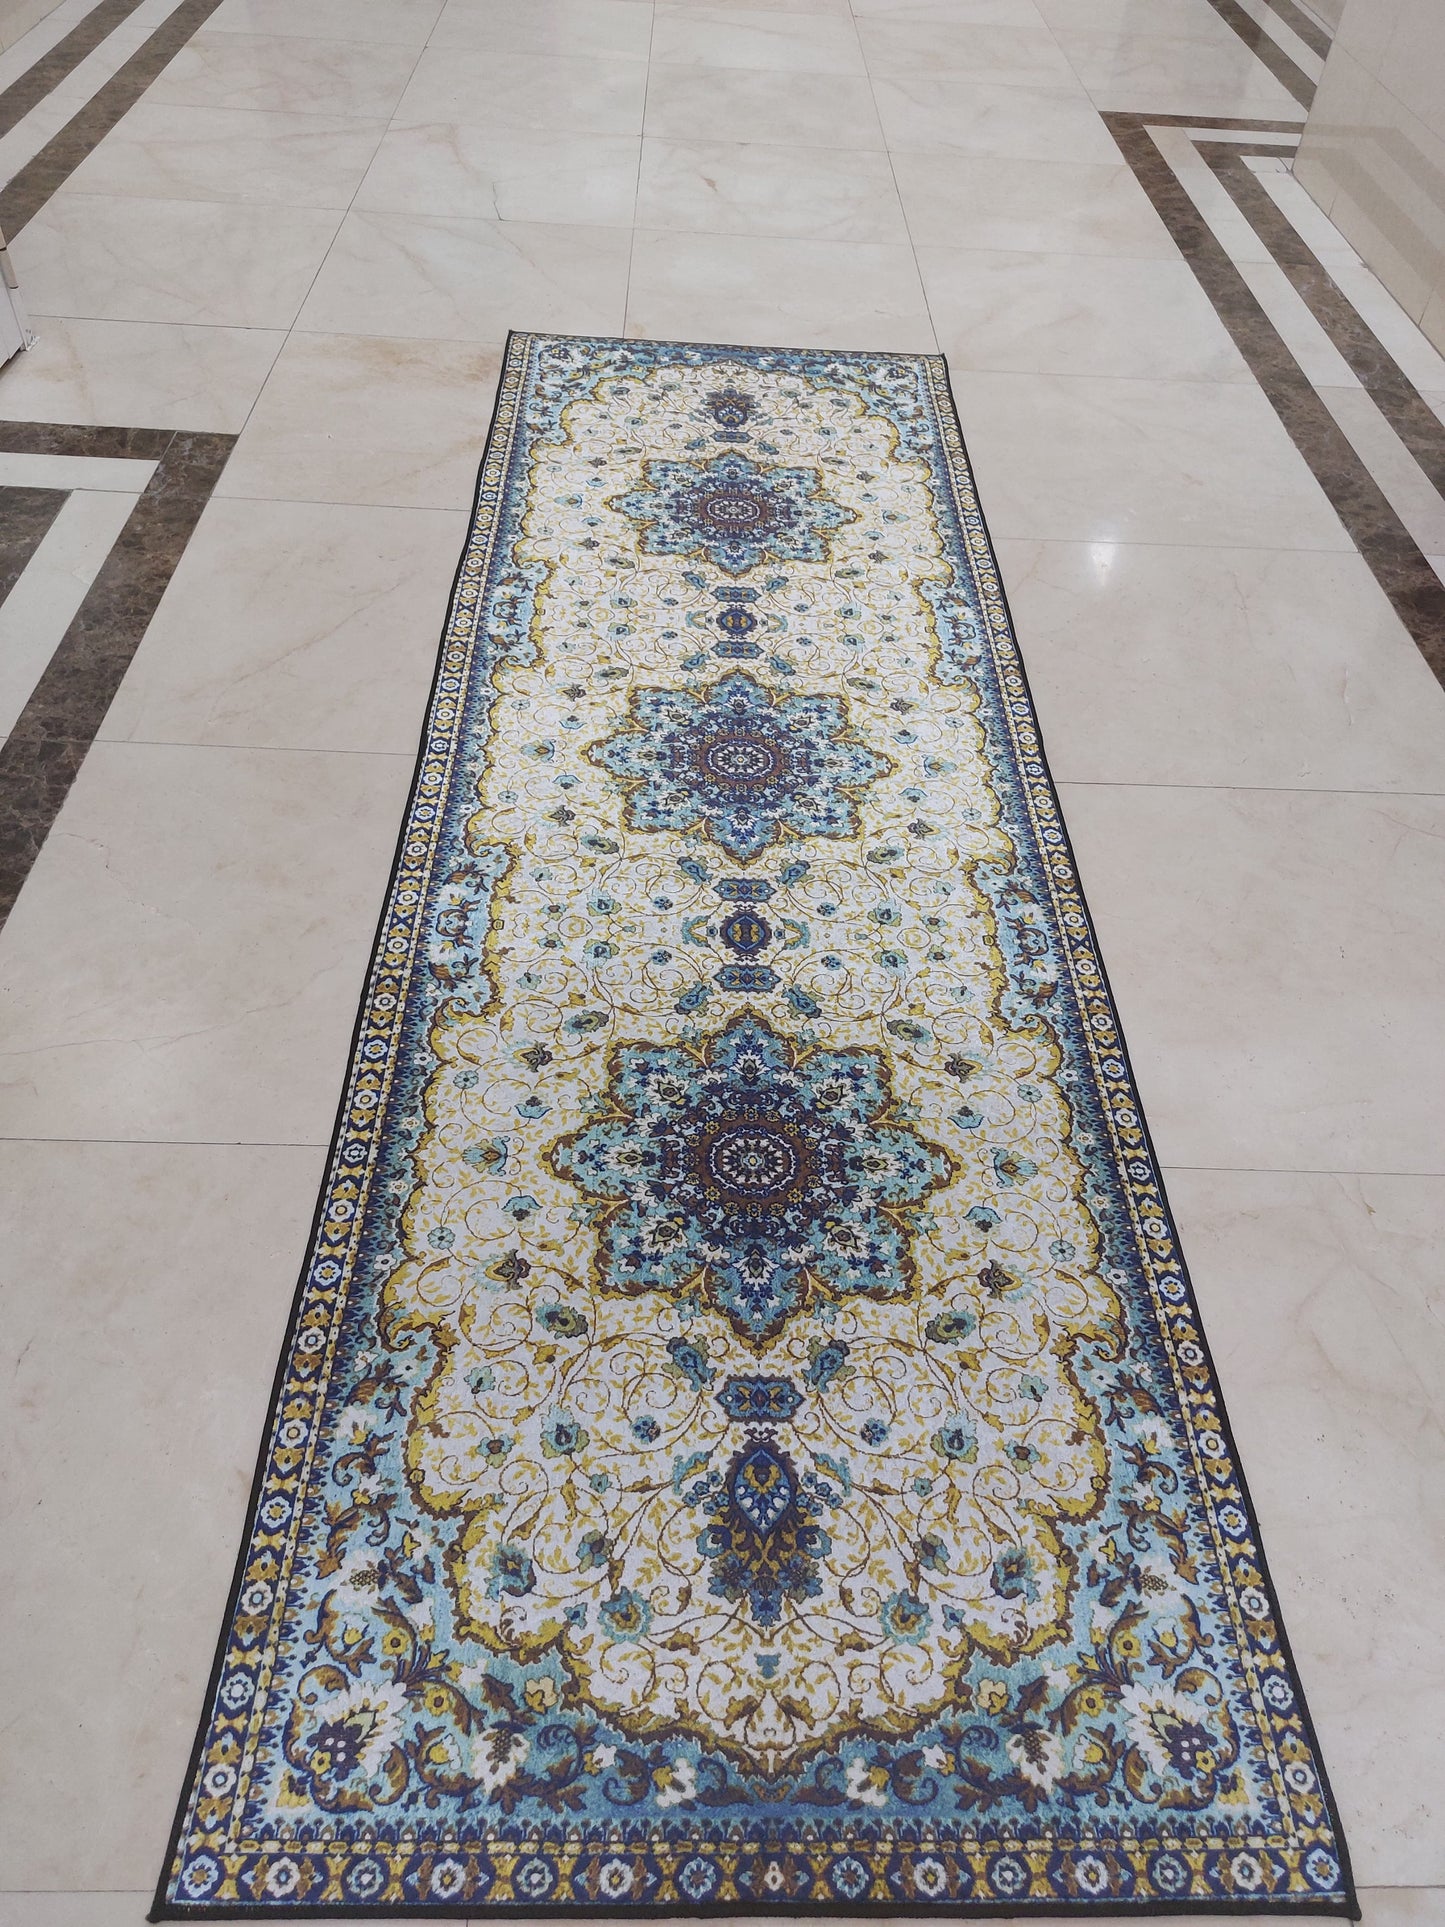 Brand New Crystal  carpet - Runner - Anti slip with Quality specifications 80 x 244cm►2.62 x 8.00ft